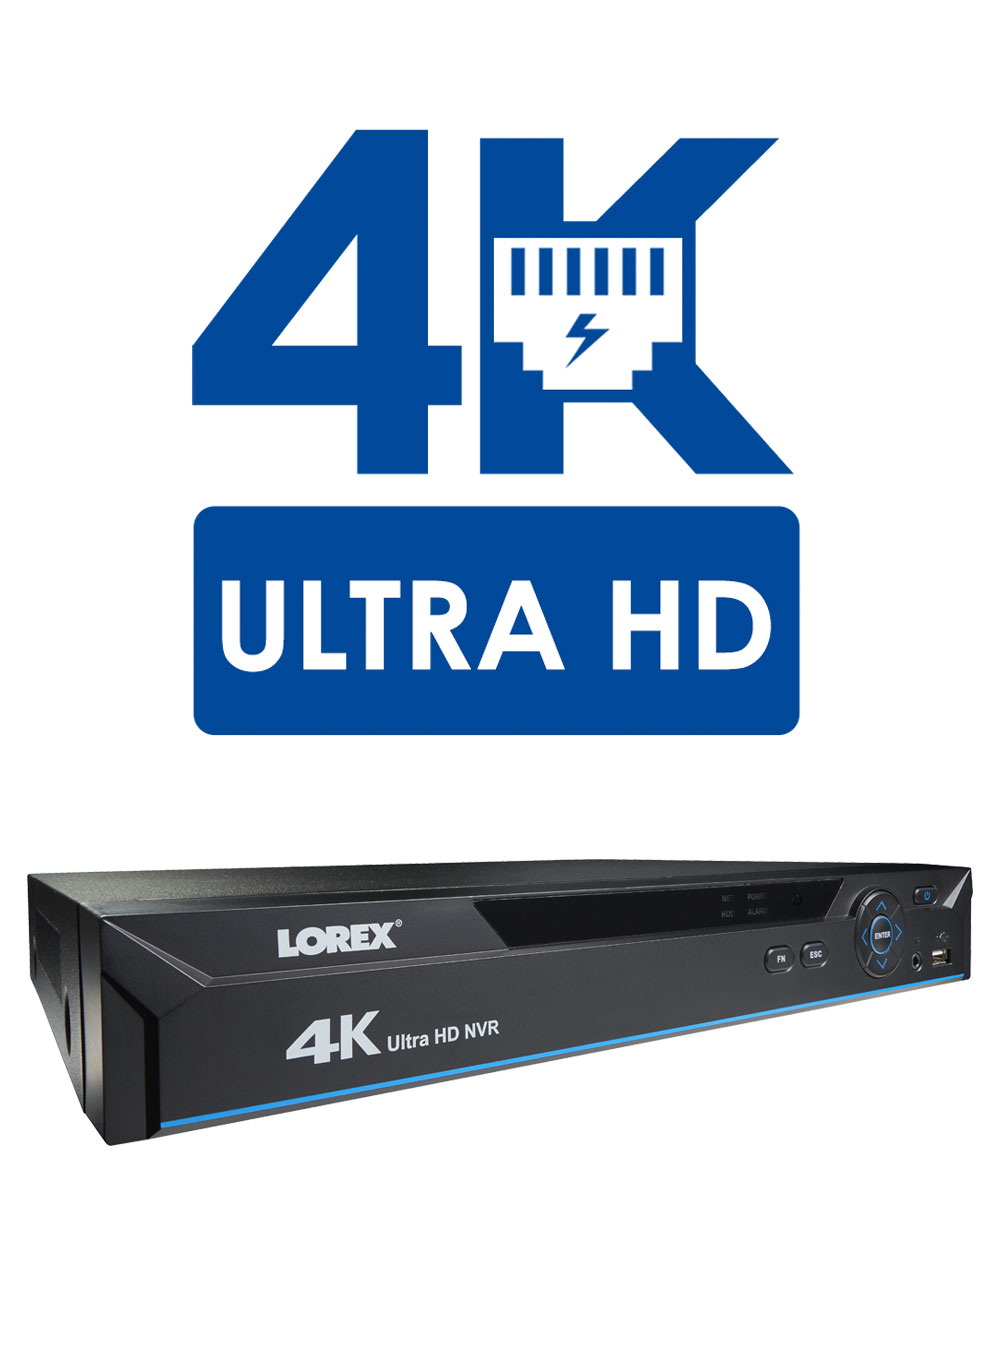 Powerful HD recording and 4K capability